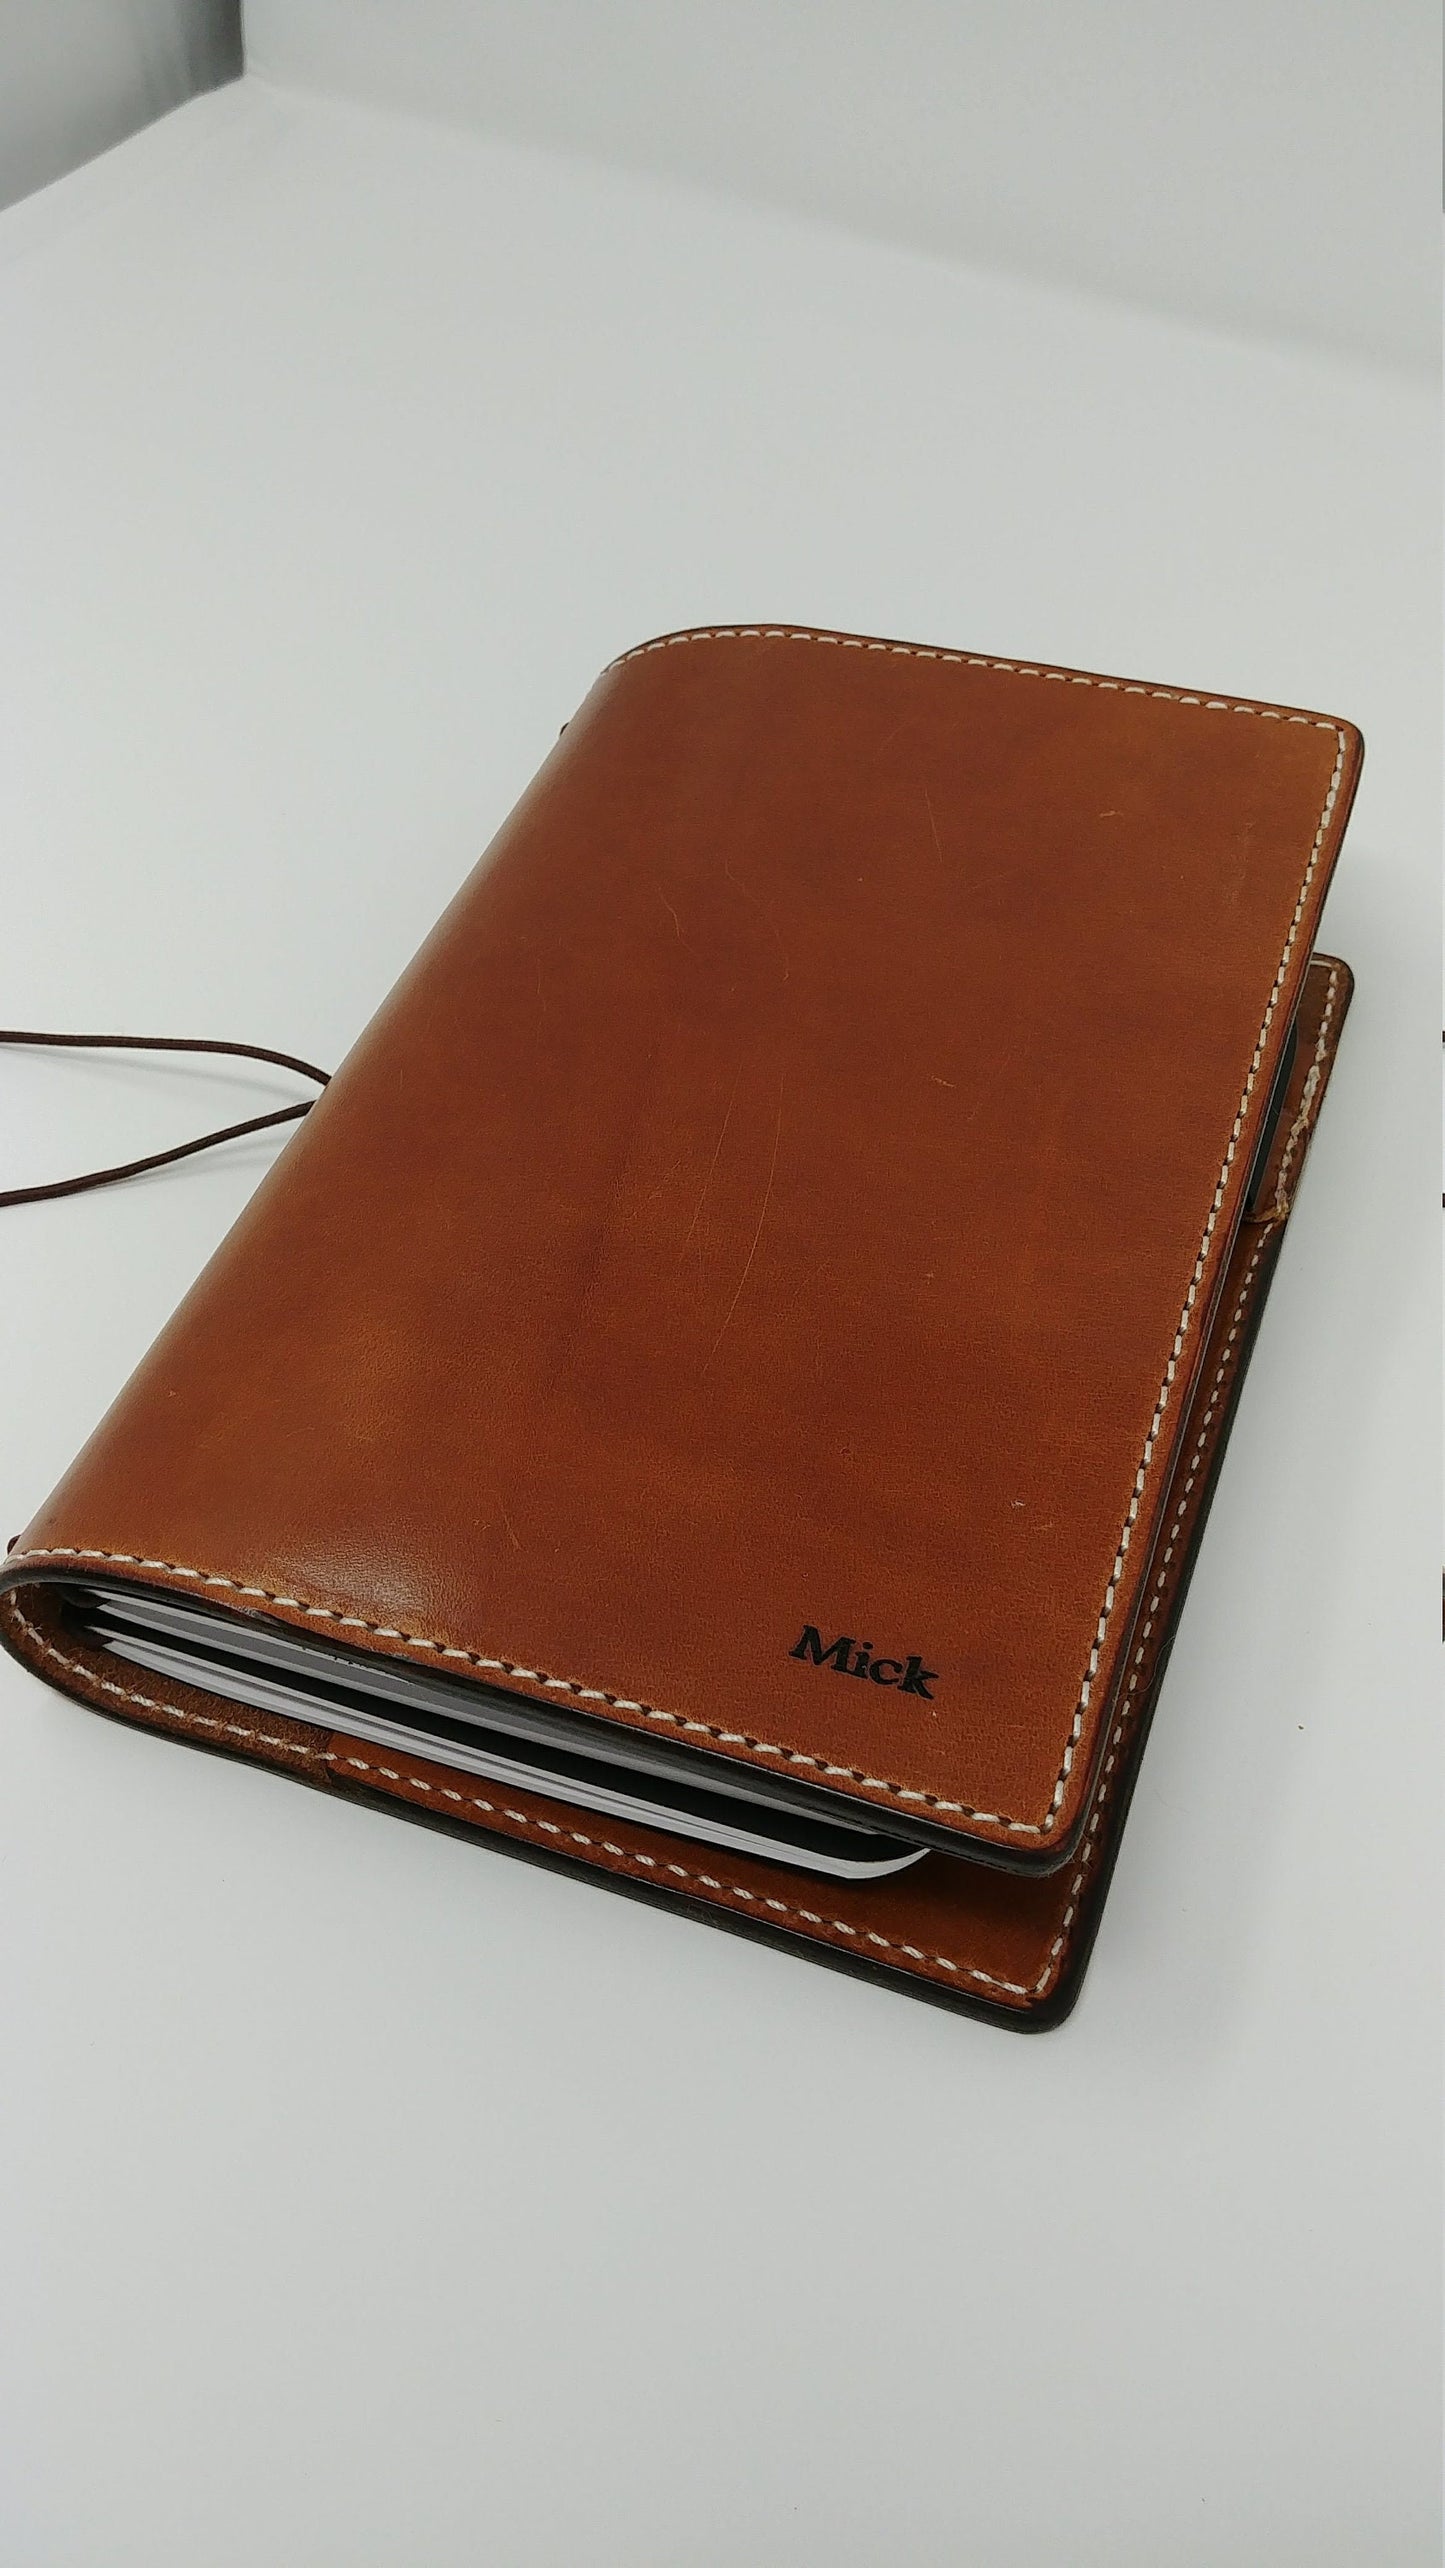 Leather Planner, B6 Traveler’s Notebook,  Deluxe w pockets & pen loop, Full Grain Leather Journal fits 5x7 Inserts, Upick leather finish